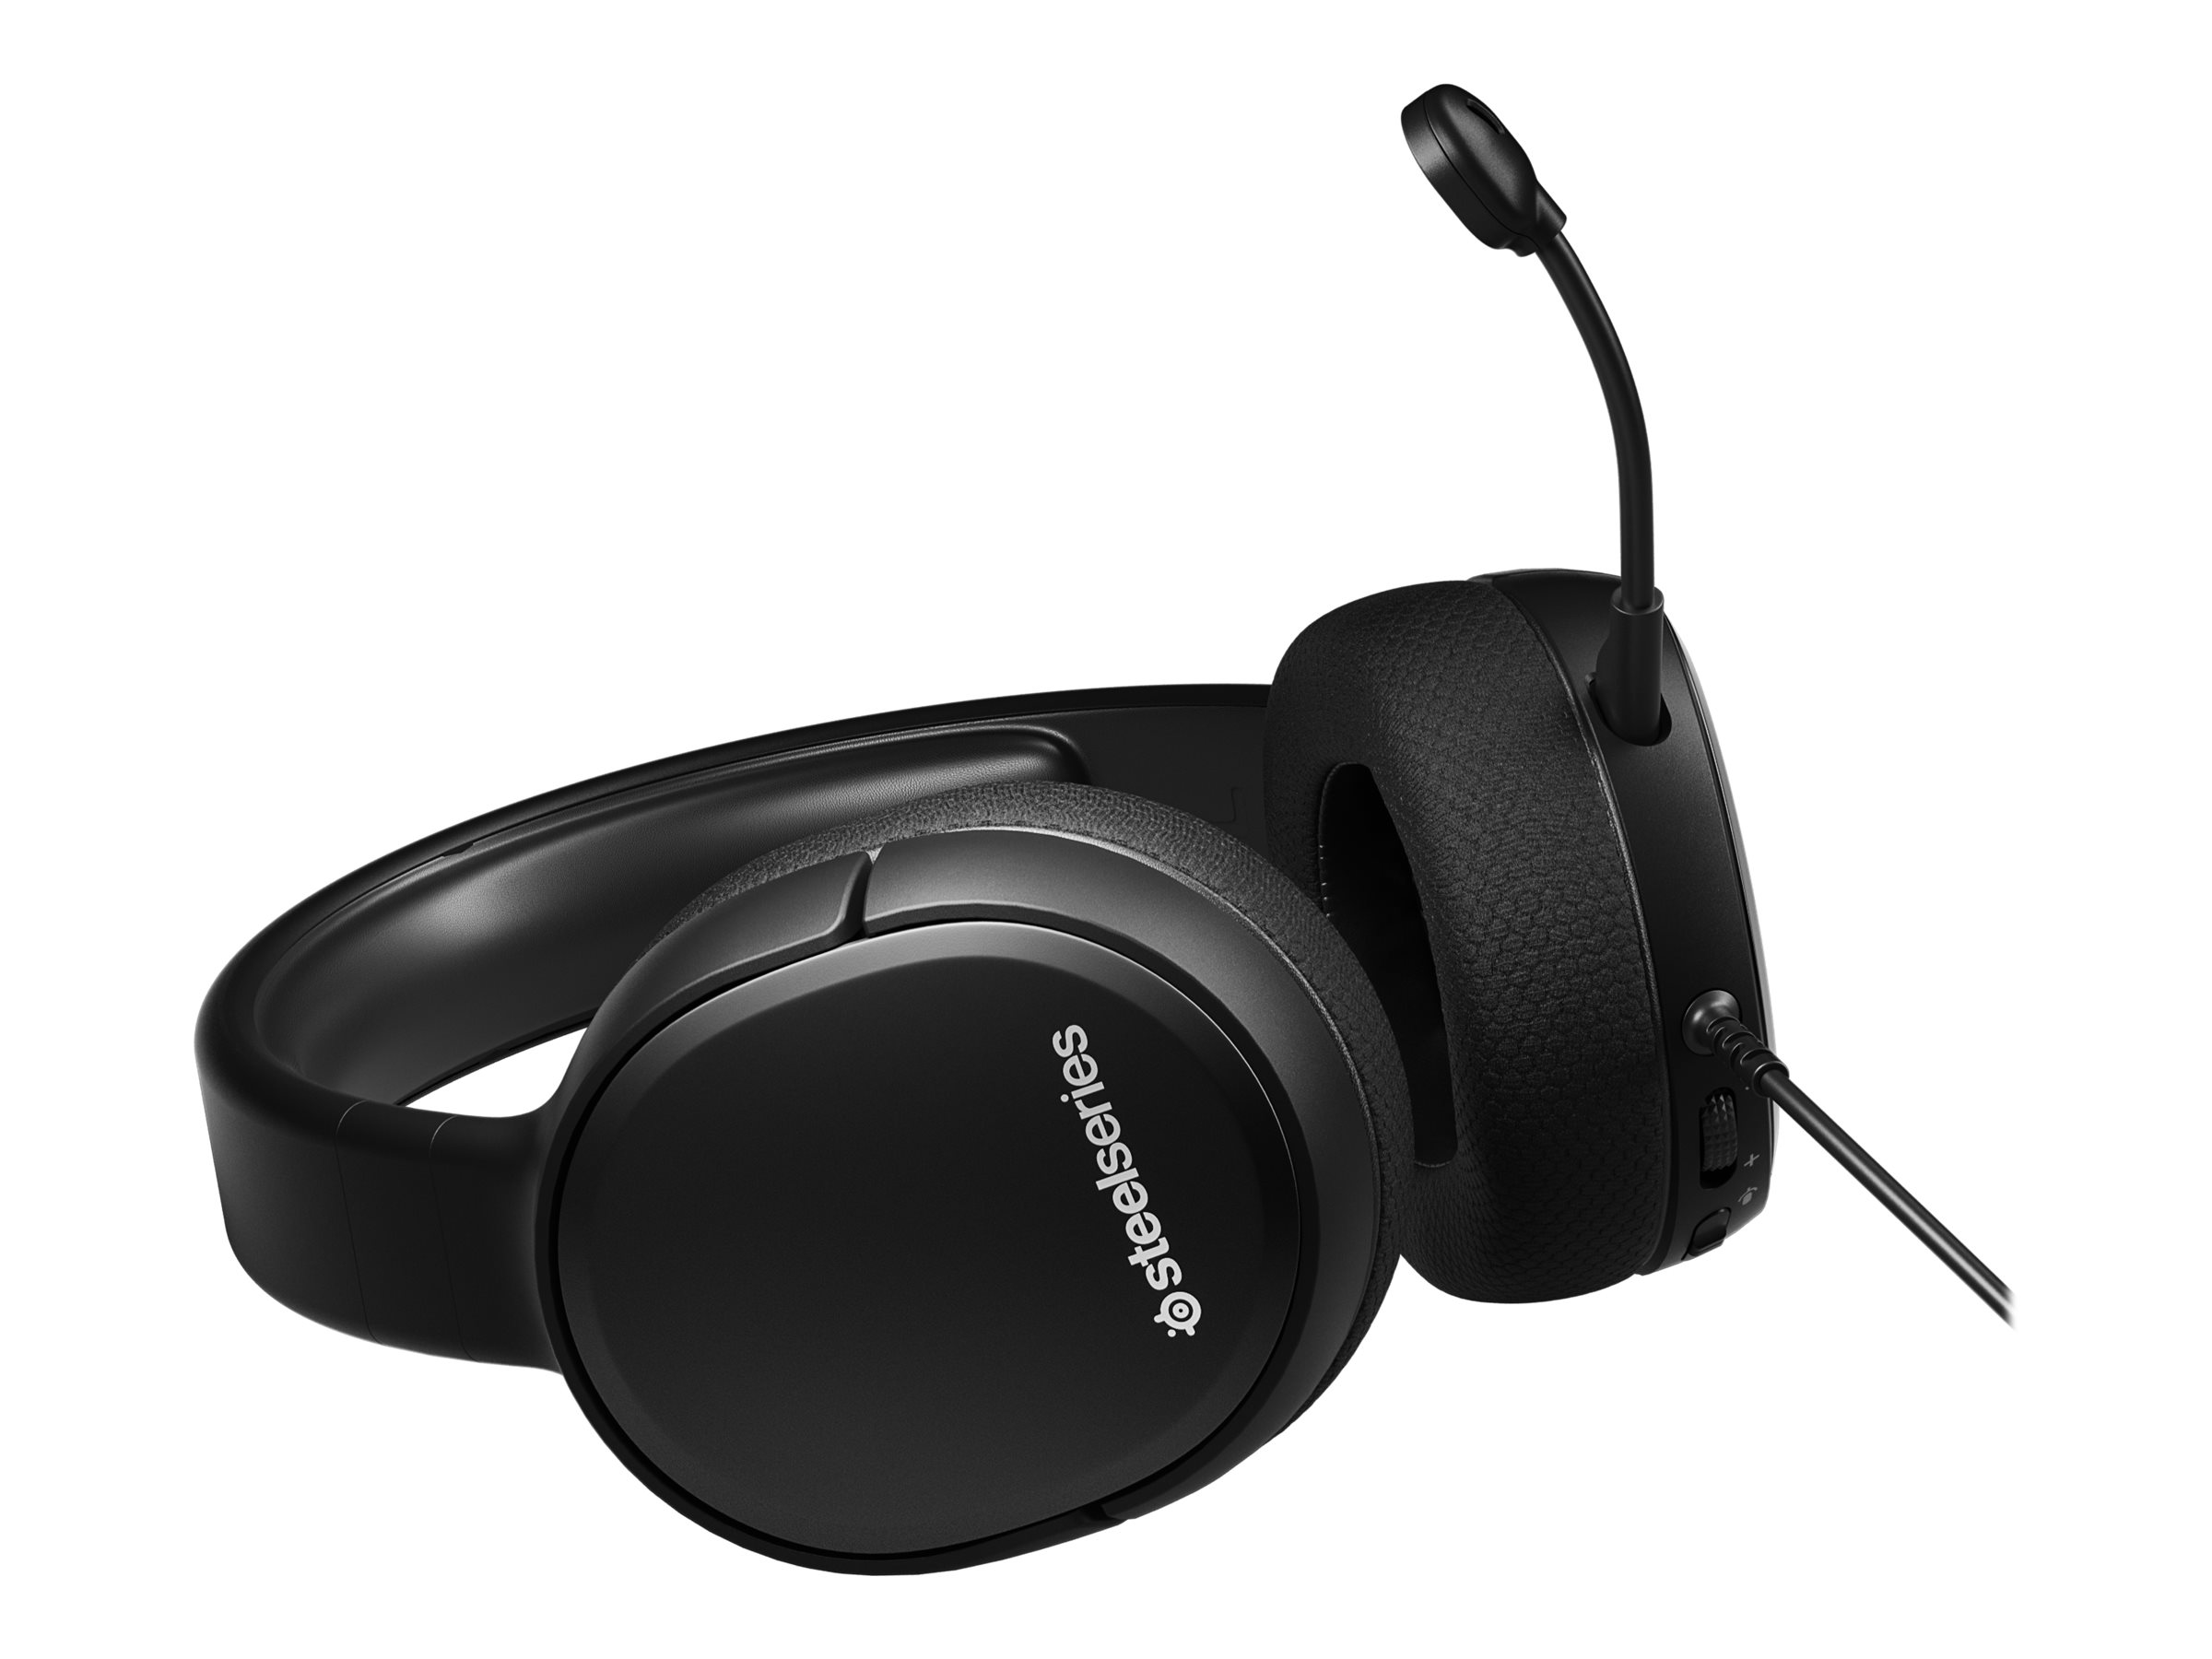 SteelSeries Arctis 1 Wireless Gaming Headset - USB-C Wireless - Detachable Clearcast Microphone - for PS4, PC, Nintendo Switch and Lite, Android - Black - Playstation 4 - image 2 of 6